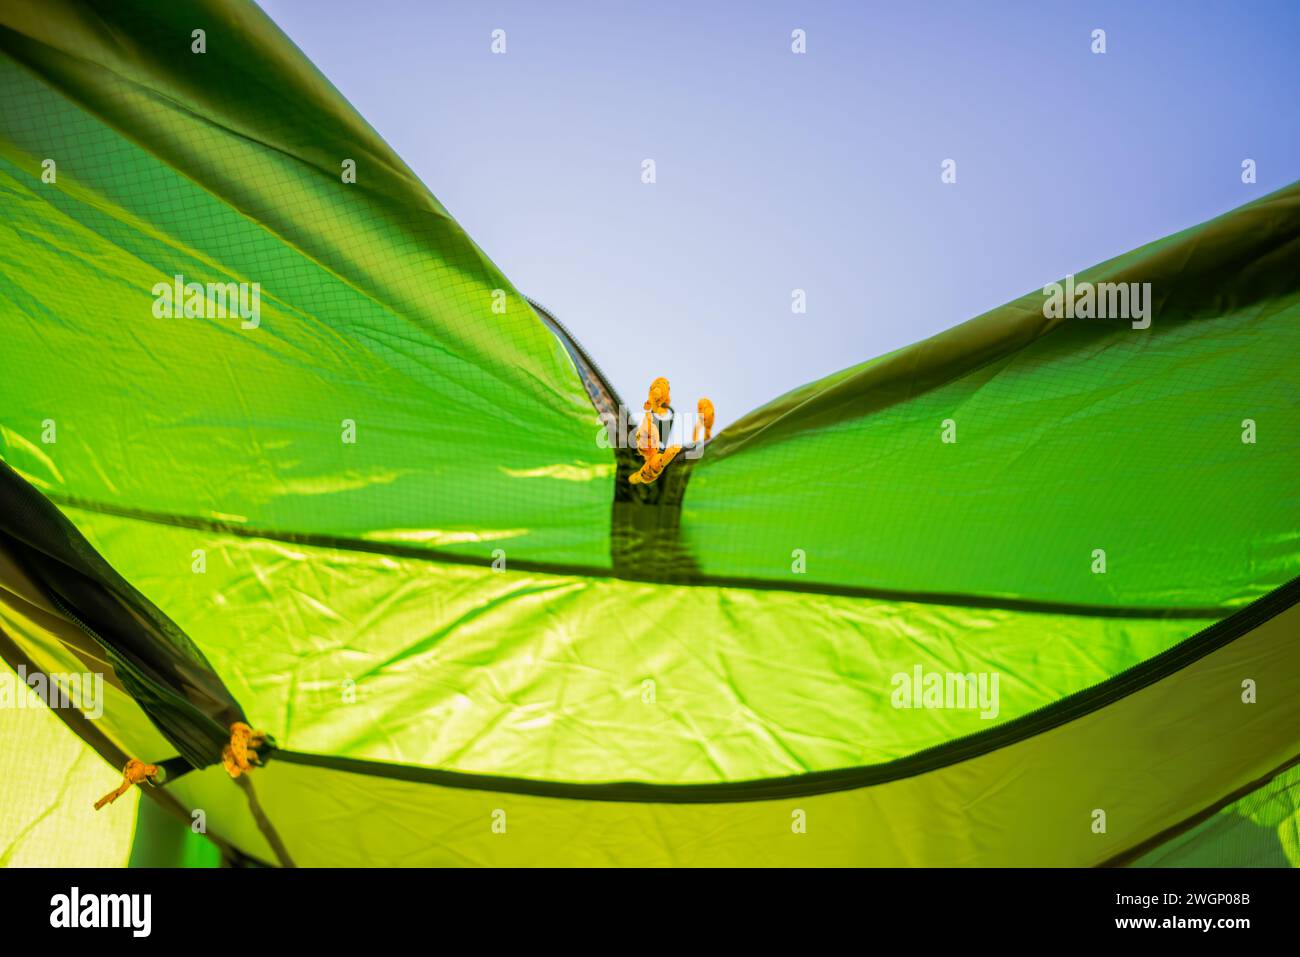 Close-up of a green tent zipper, inviting you to enter the world of outdoor adventure. Unzip and explore the beauty of nature. Stock Photo